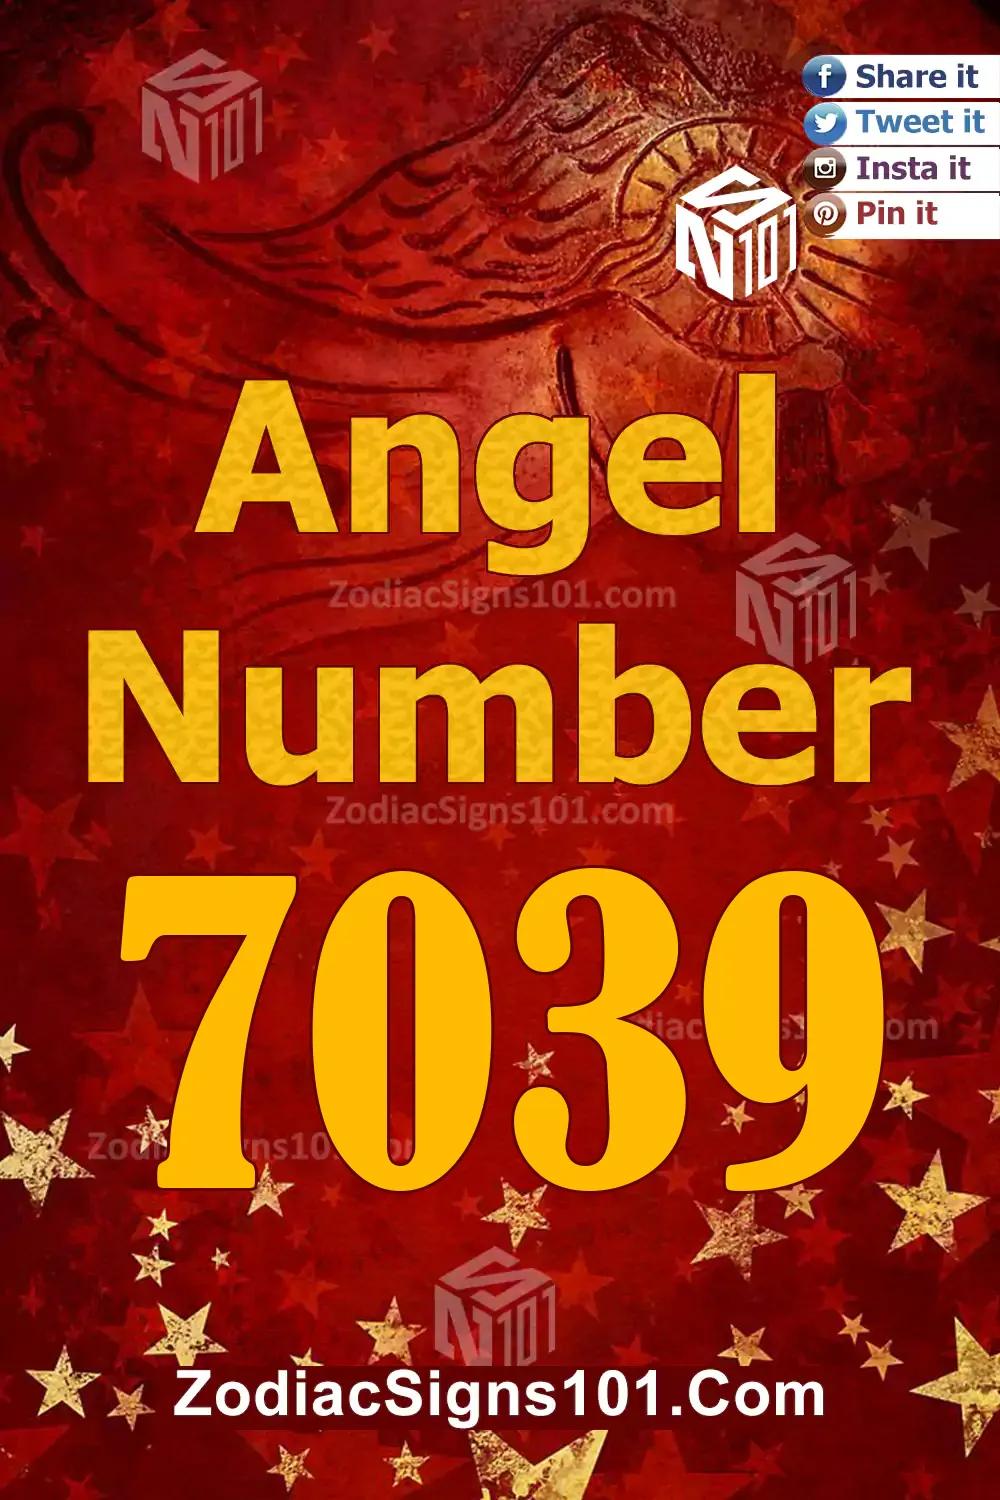 7039 Angel Number Meaning